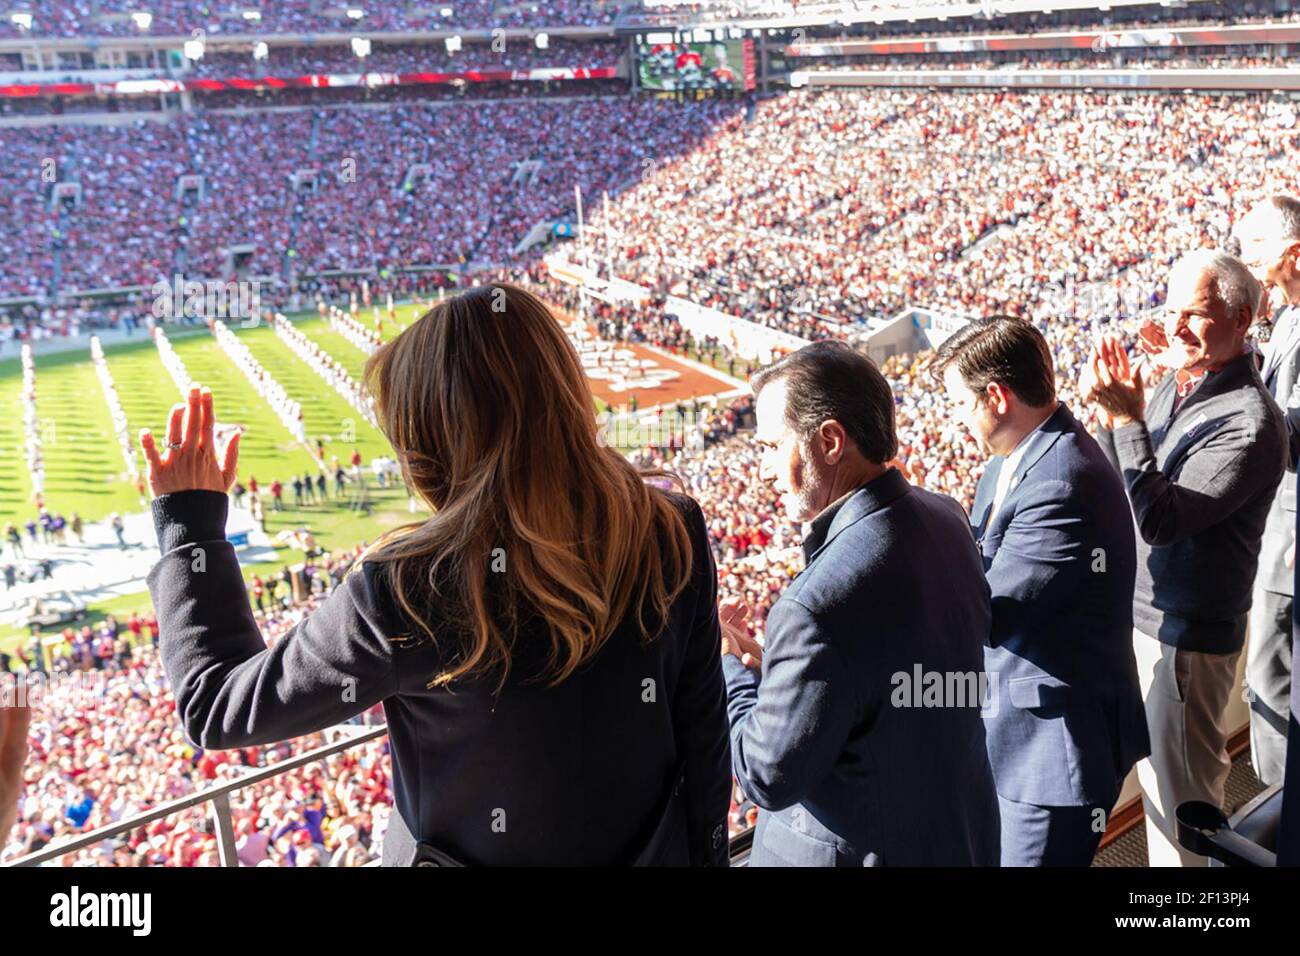 First Lady Melania Trump watches the action on the field at Bryant-Denny Stadium Saturday Nov. 9 2019 while attending the University of Alabama -Louisiana State University football game in Tuscaloosa Ala. Stock Photo